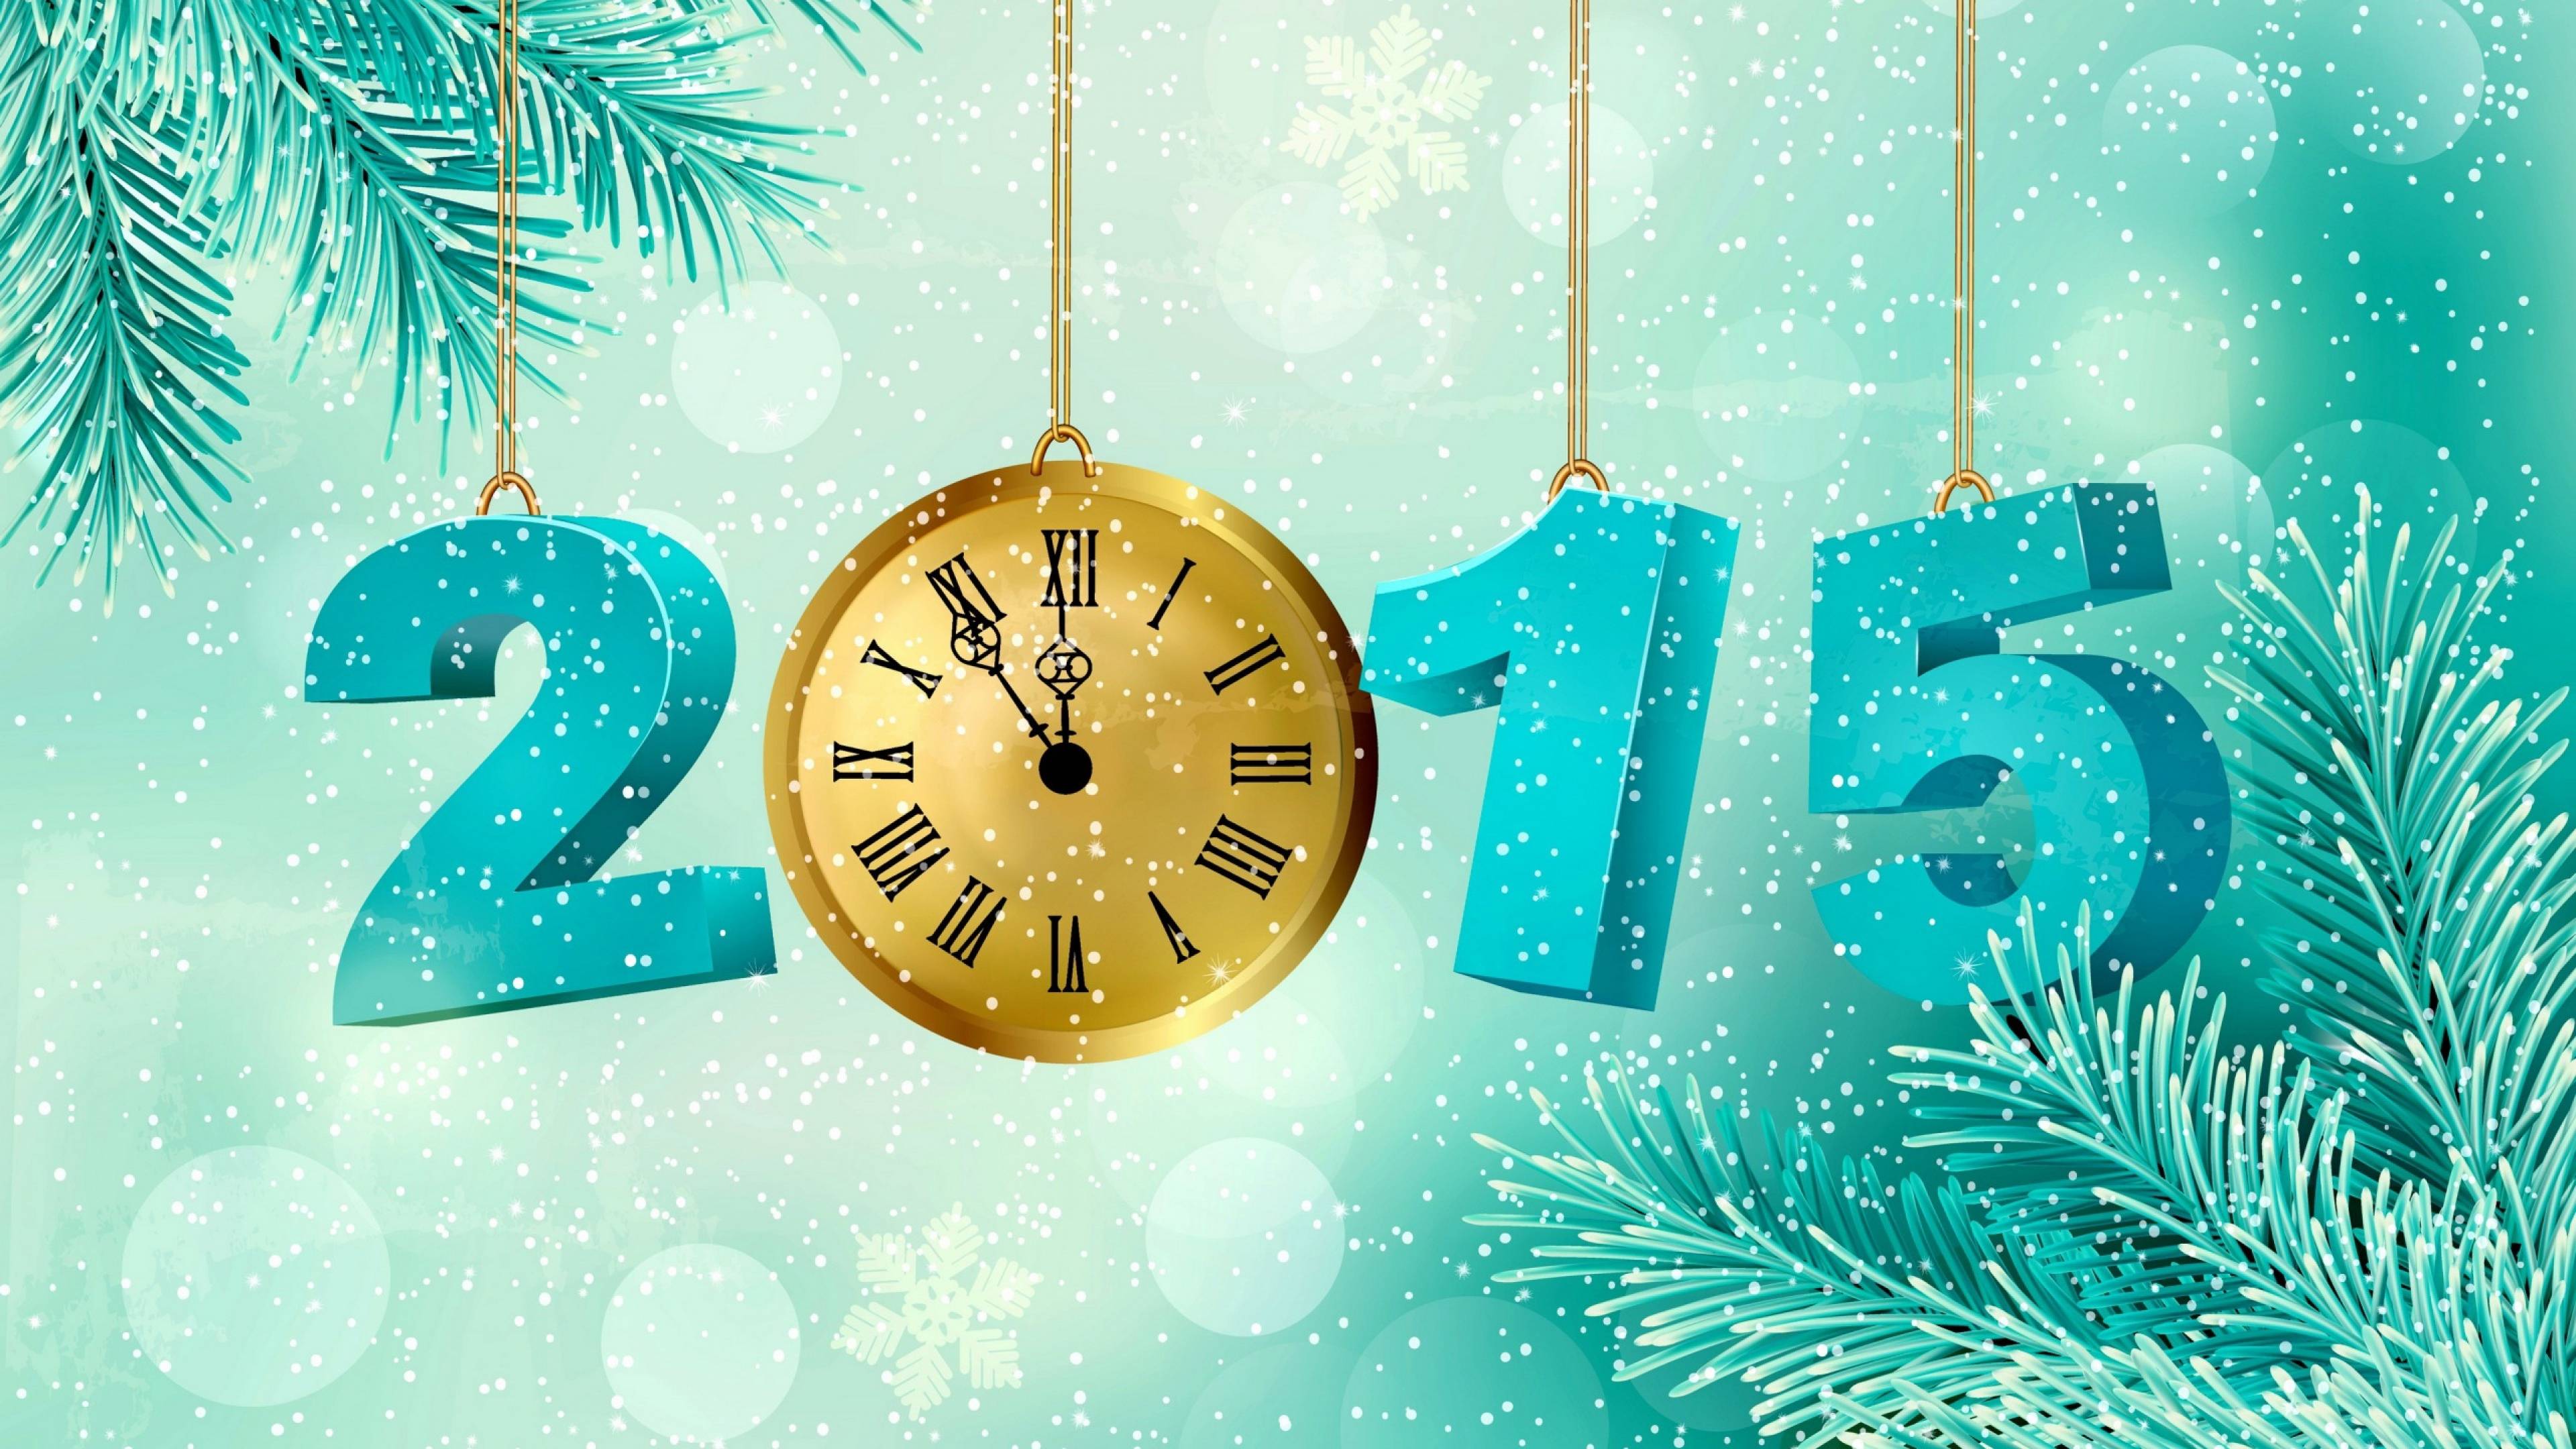 Download Wallpaper 3840x2160 new year, holiday, christmas 4K